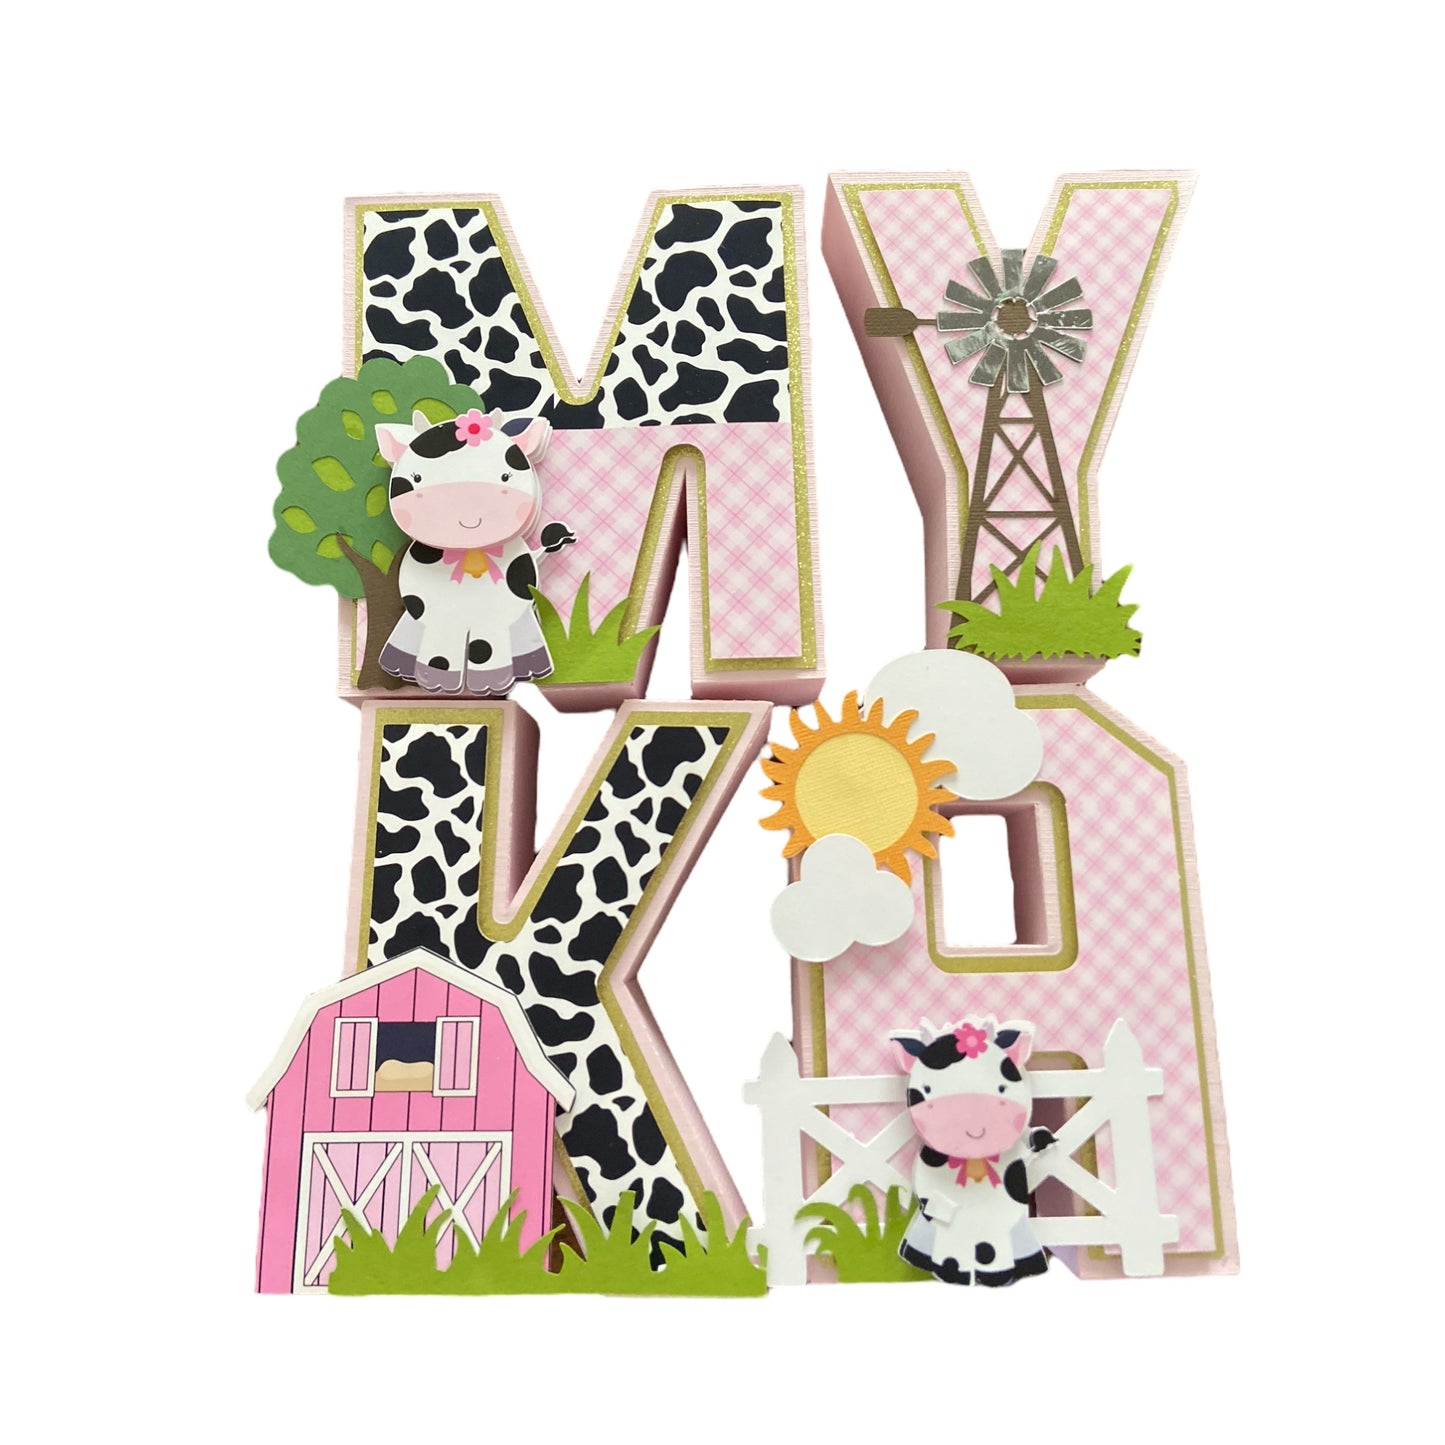 Moo I Am ONE Cow 3D letters